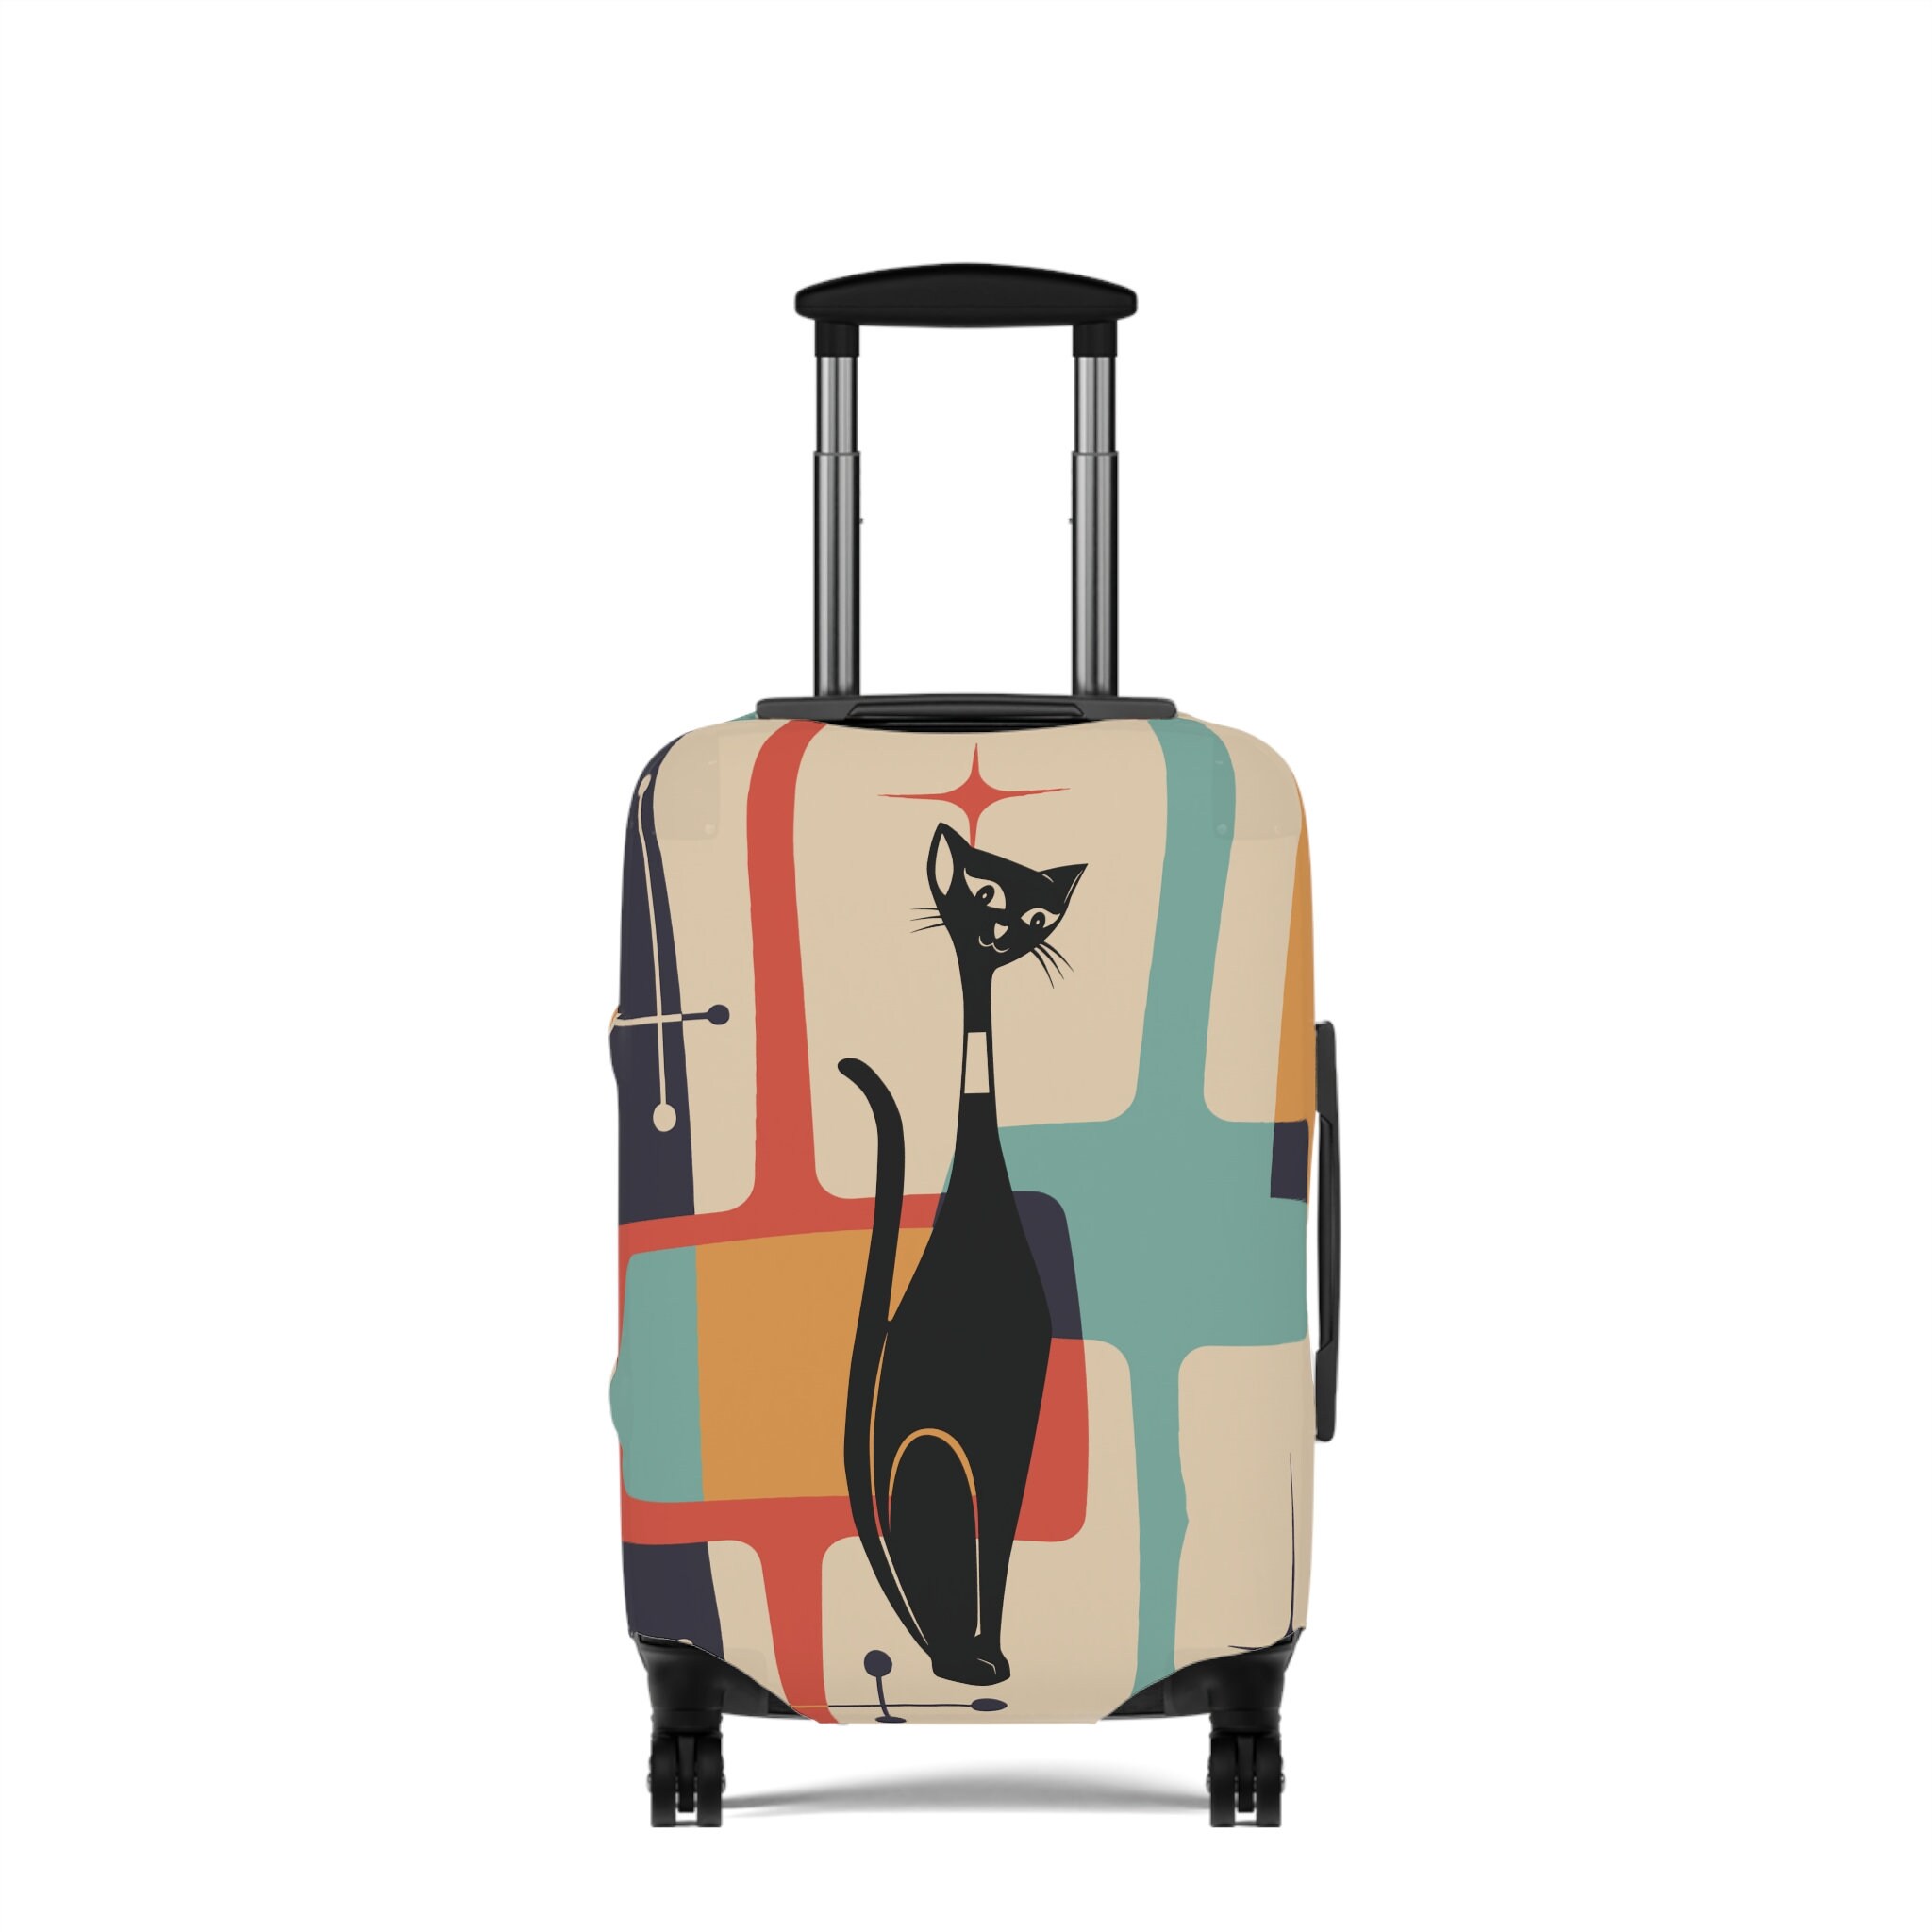 Retro Atomic Cat Luggage Cover, Cat Lover Gift